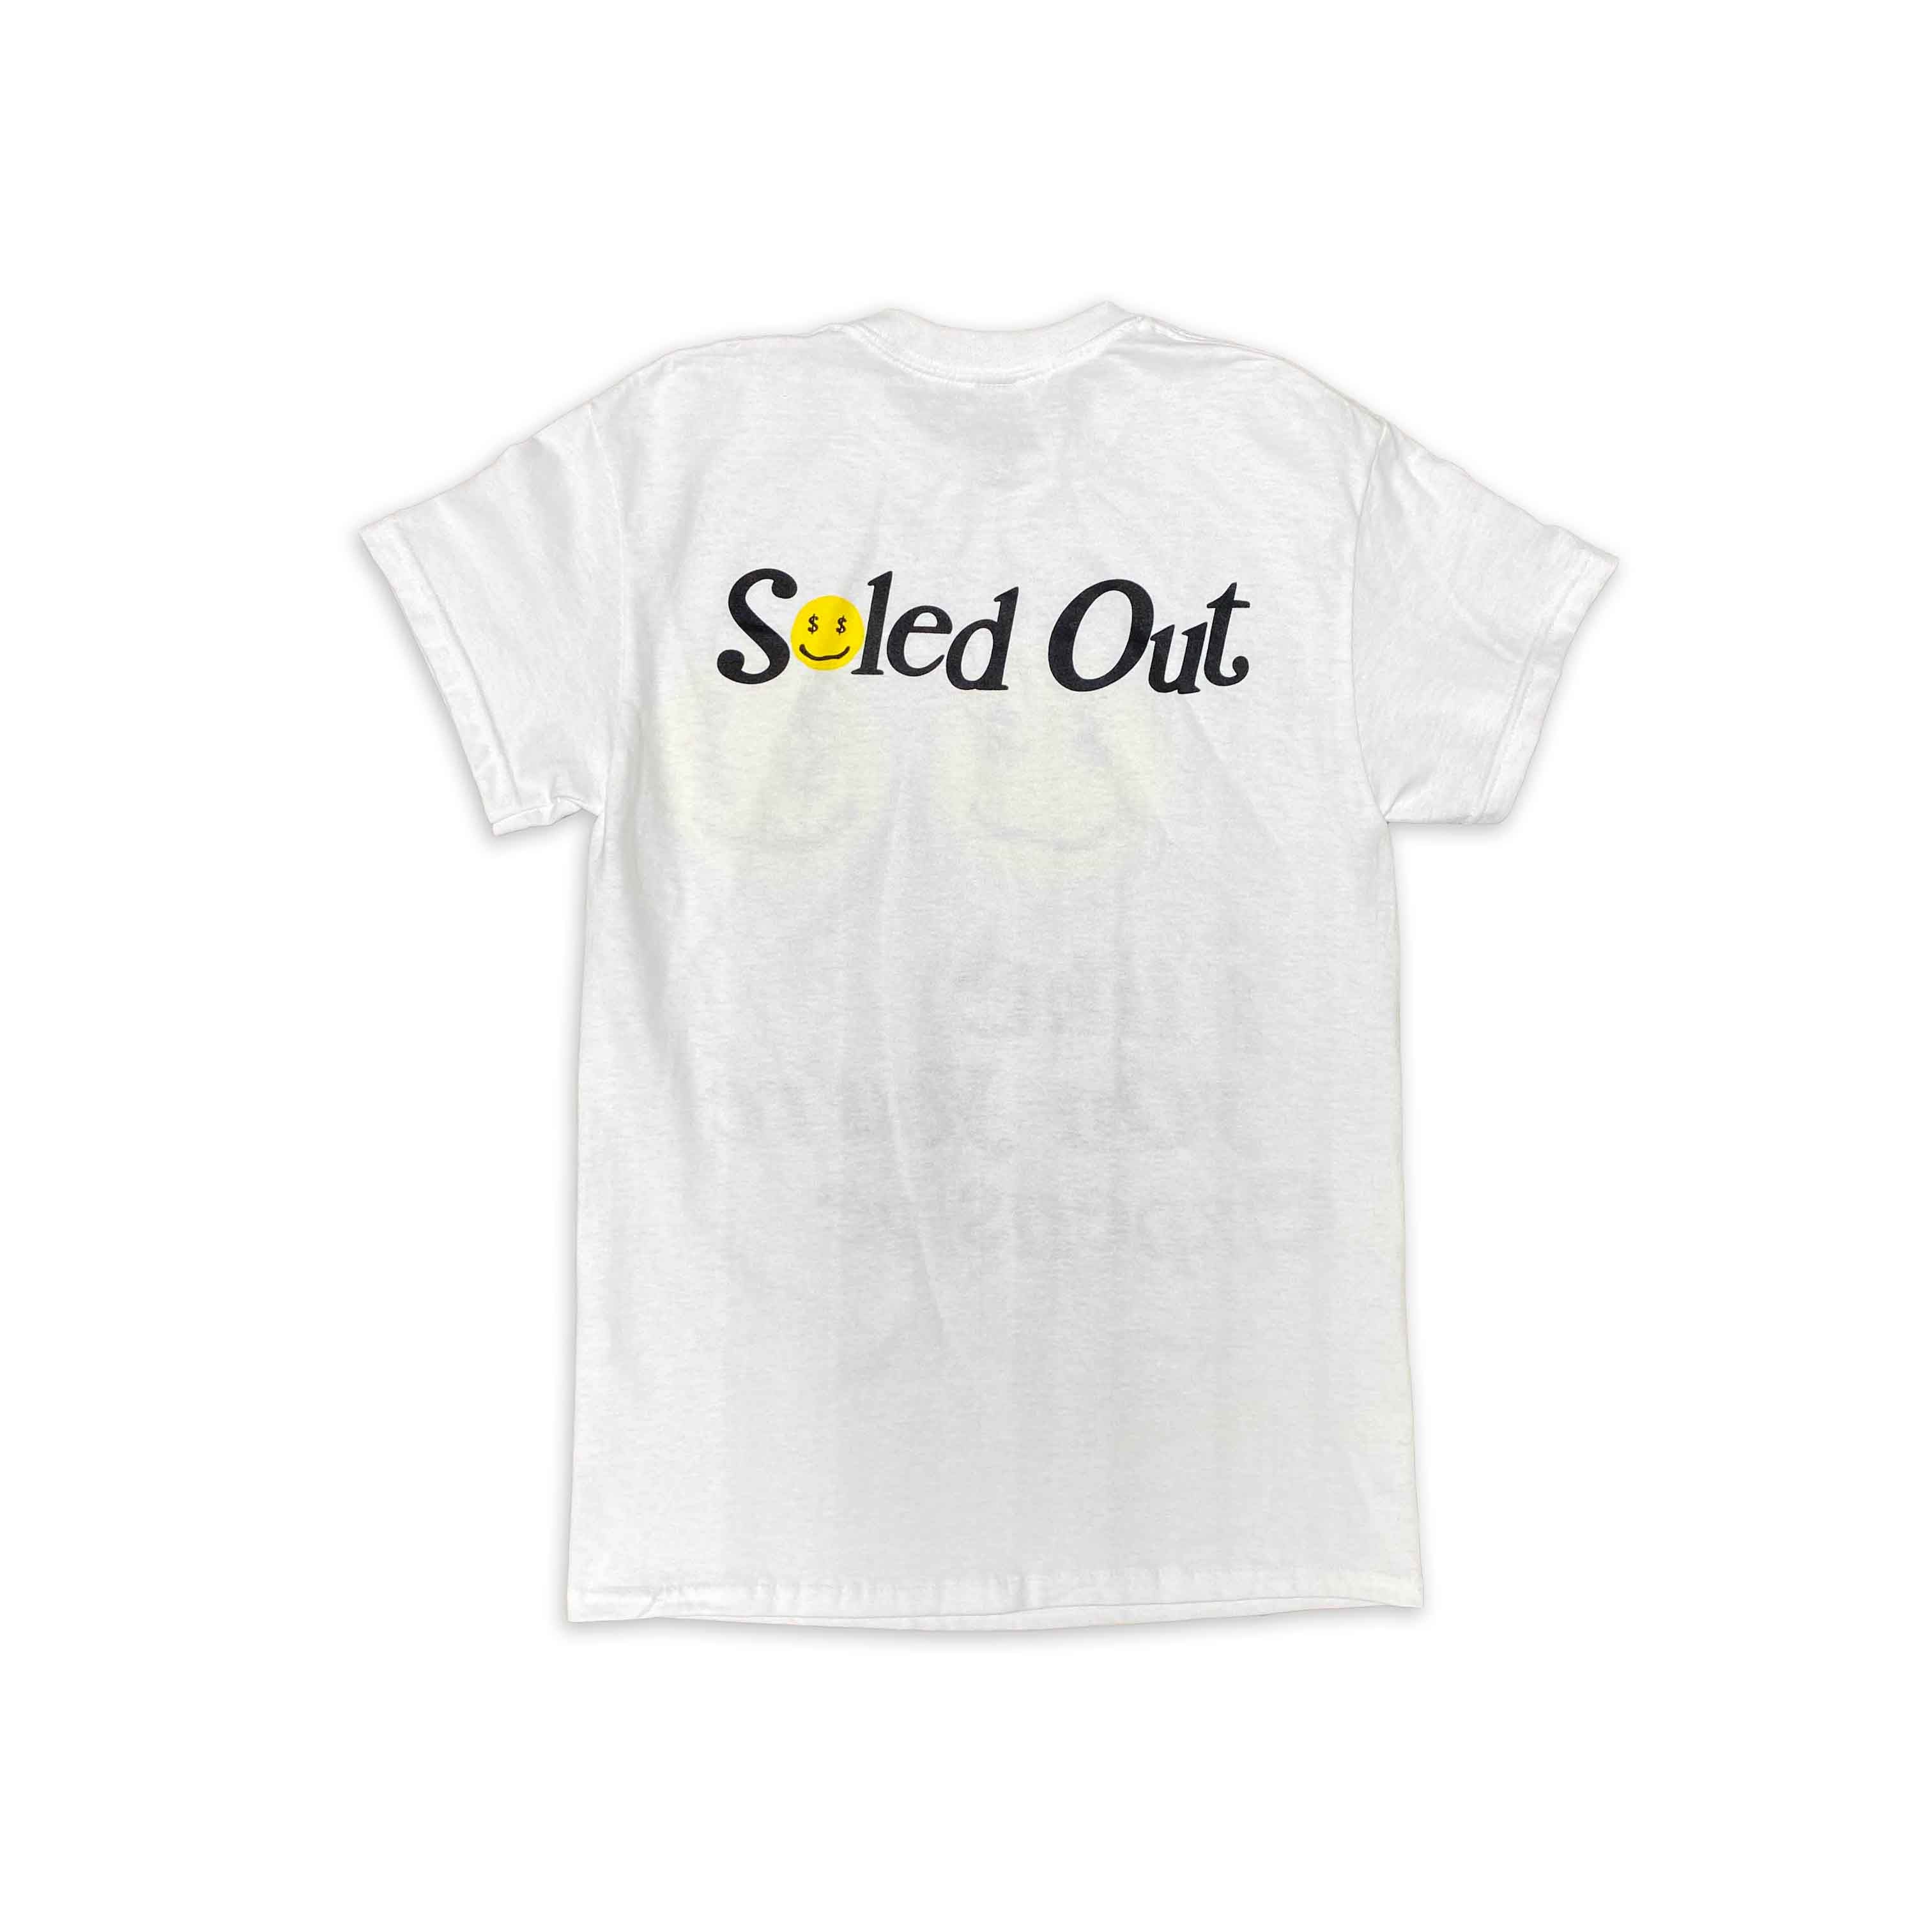 Soled Out T-Shirt "EXPENSIVE" White New Size L